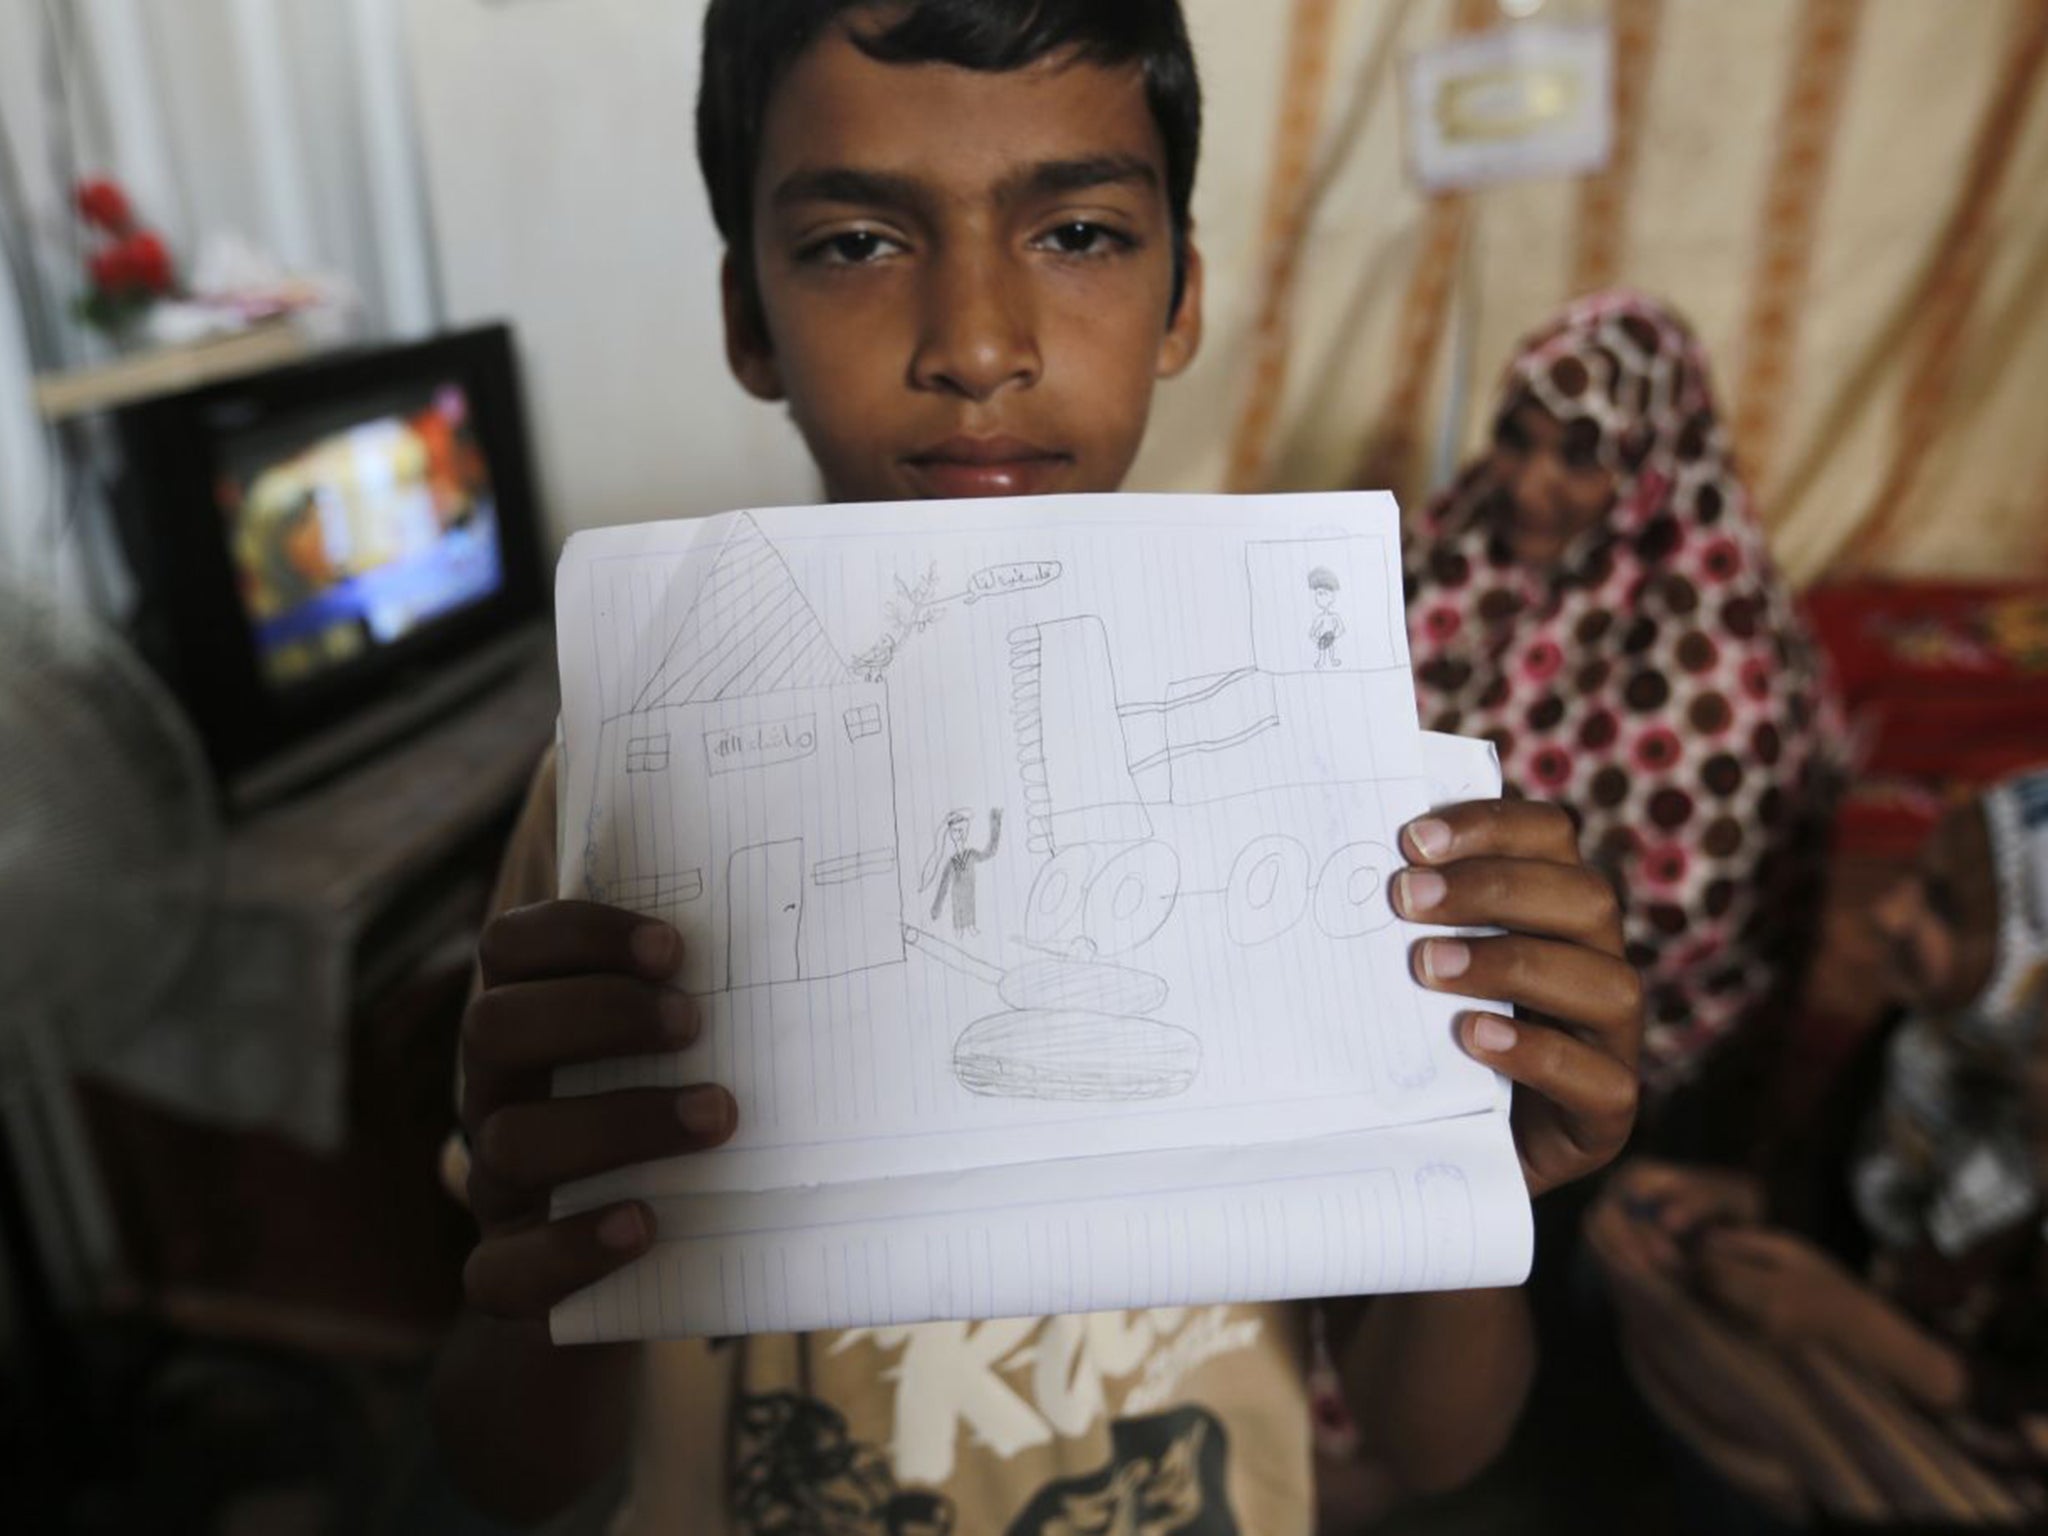 Ahmed al-Najjar, 13, shows a picture he drew of the Israeli bombs falling. He lives with his family in one of the caravans in Khuzaa